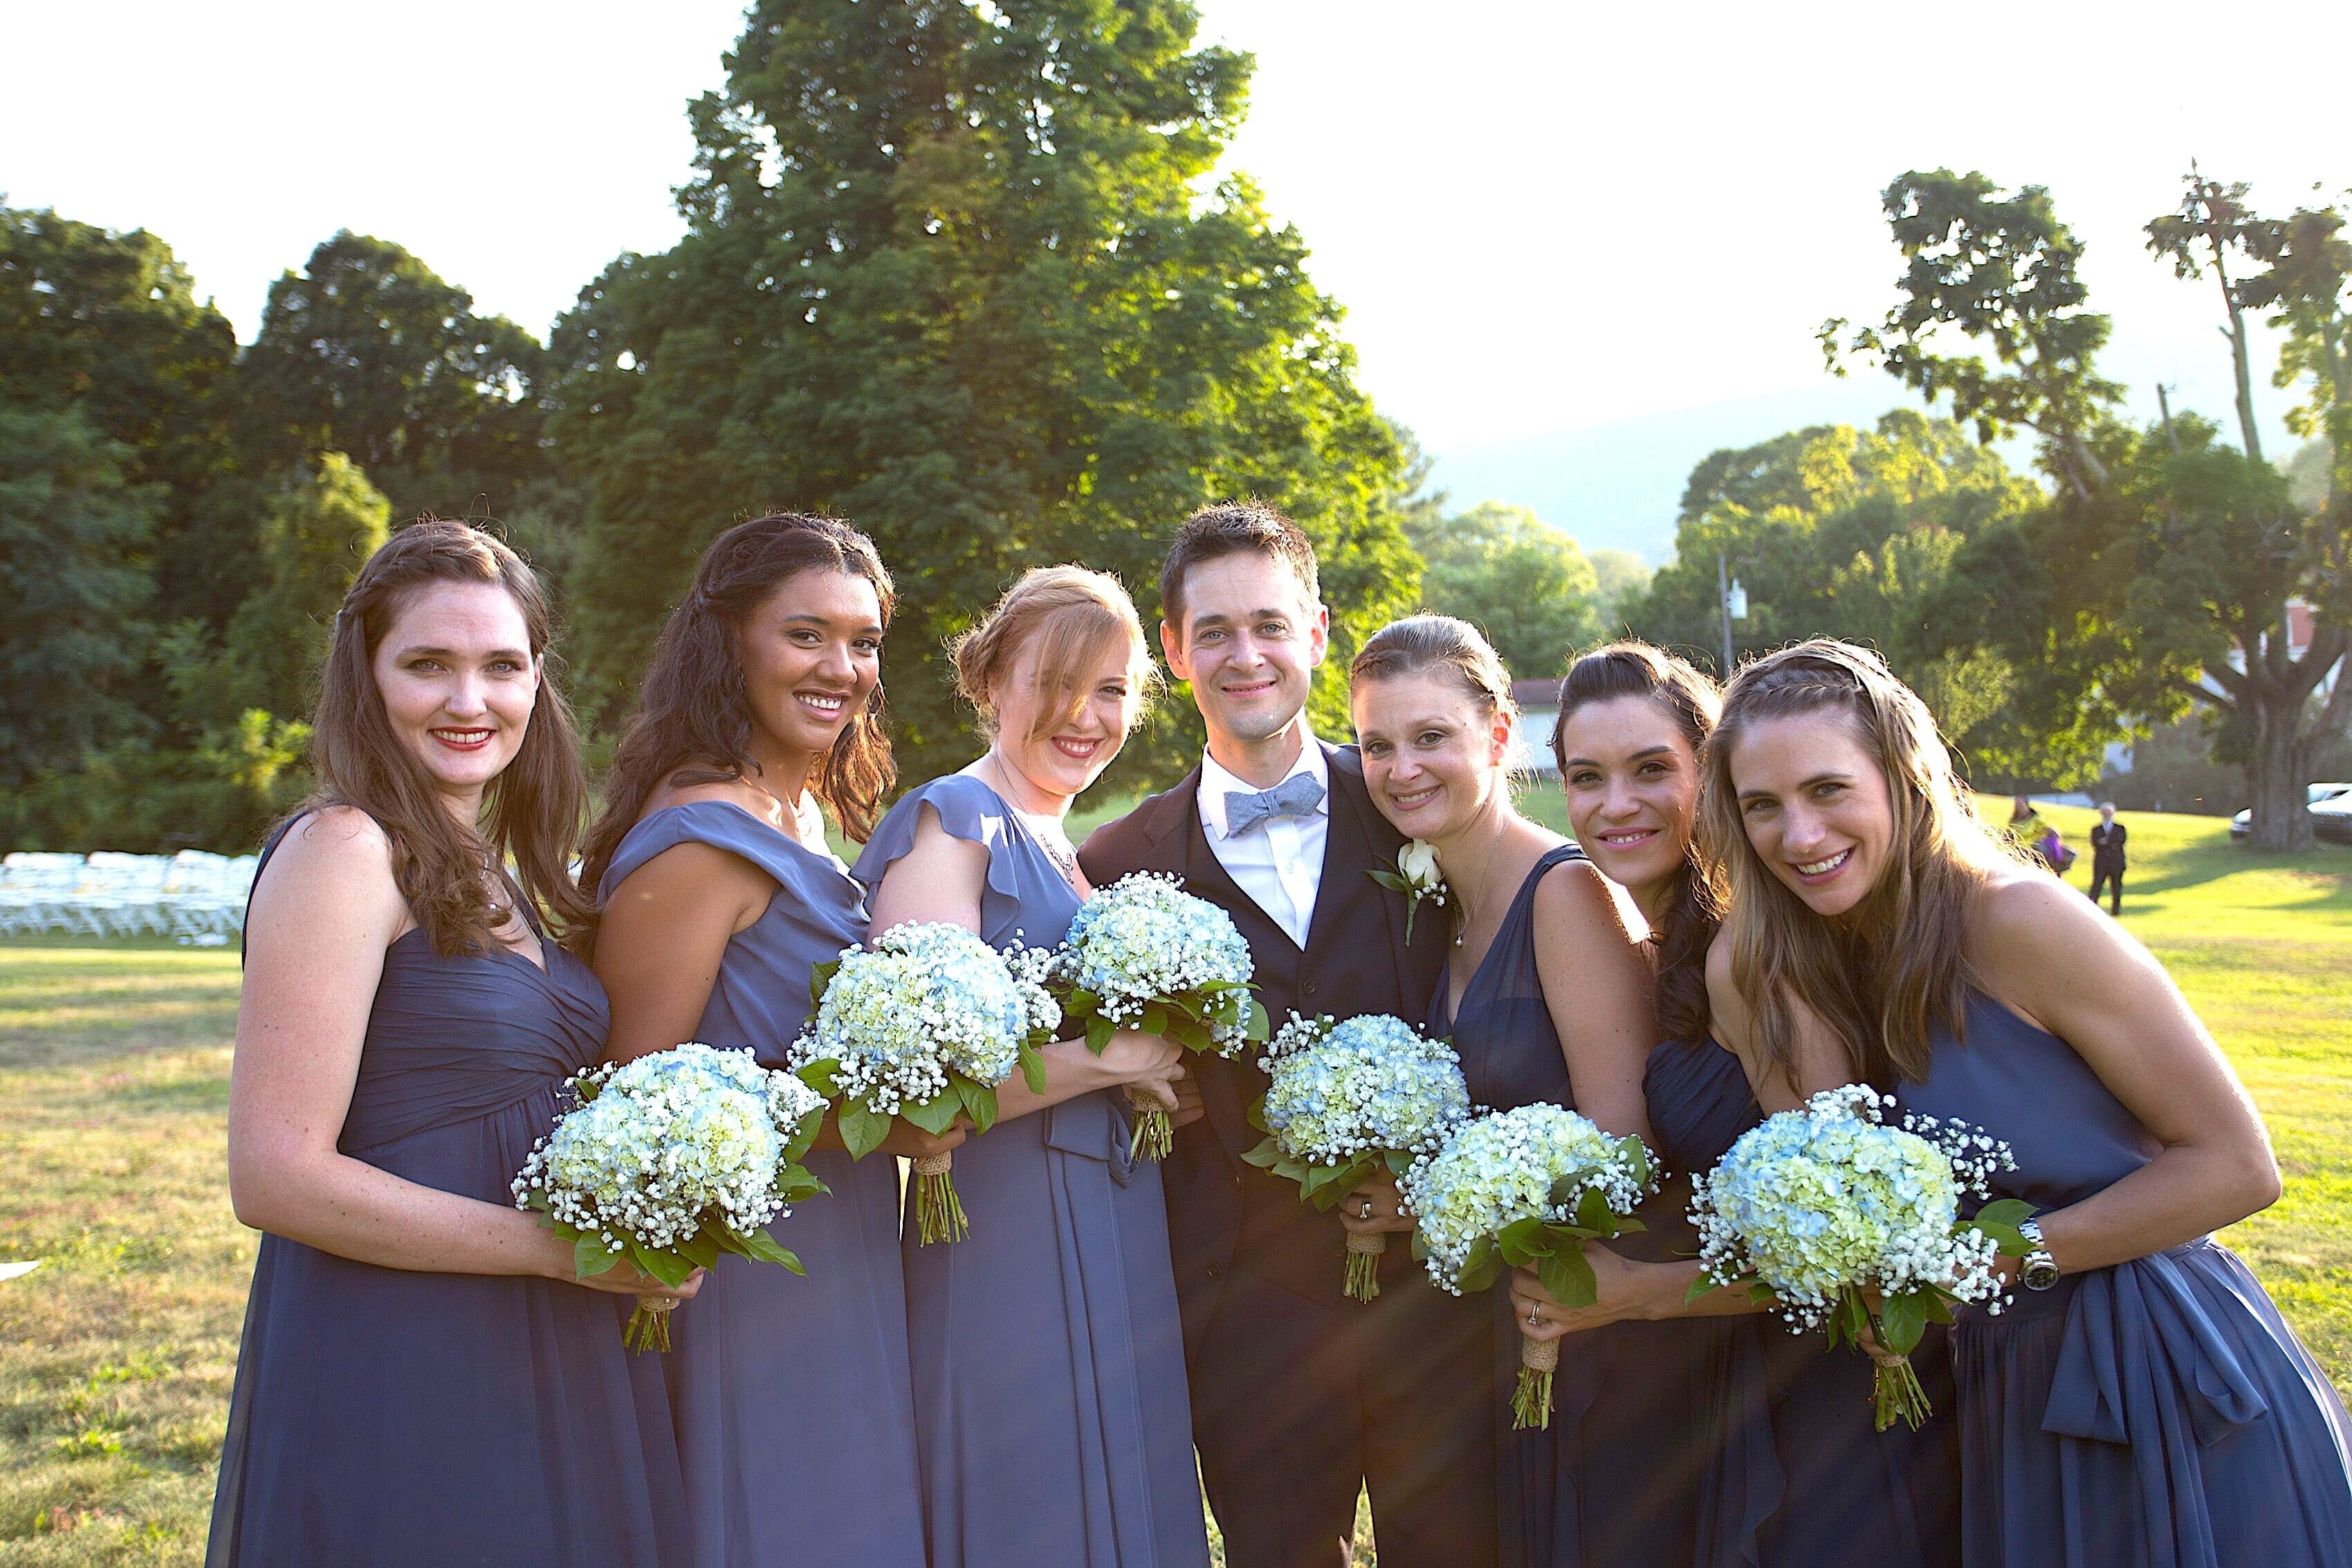 Groom with bridesmaids.